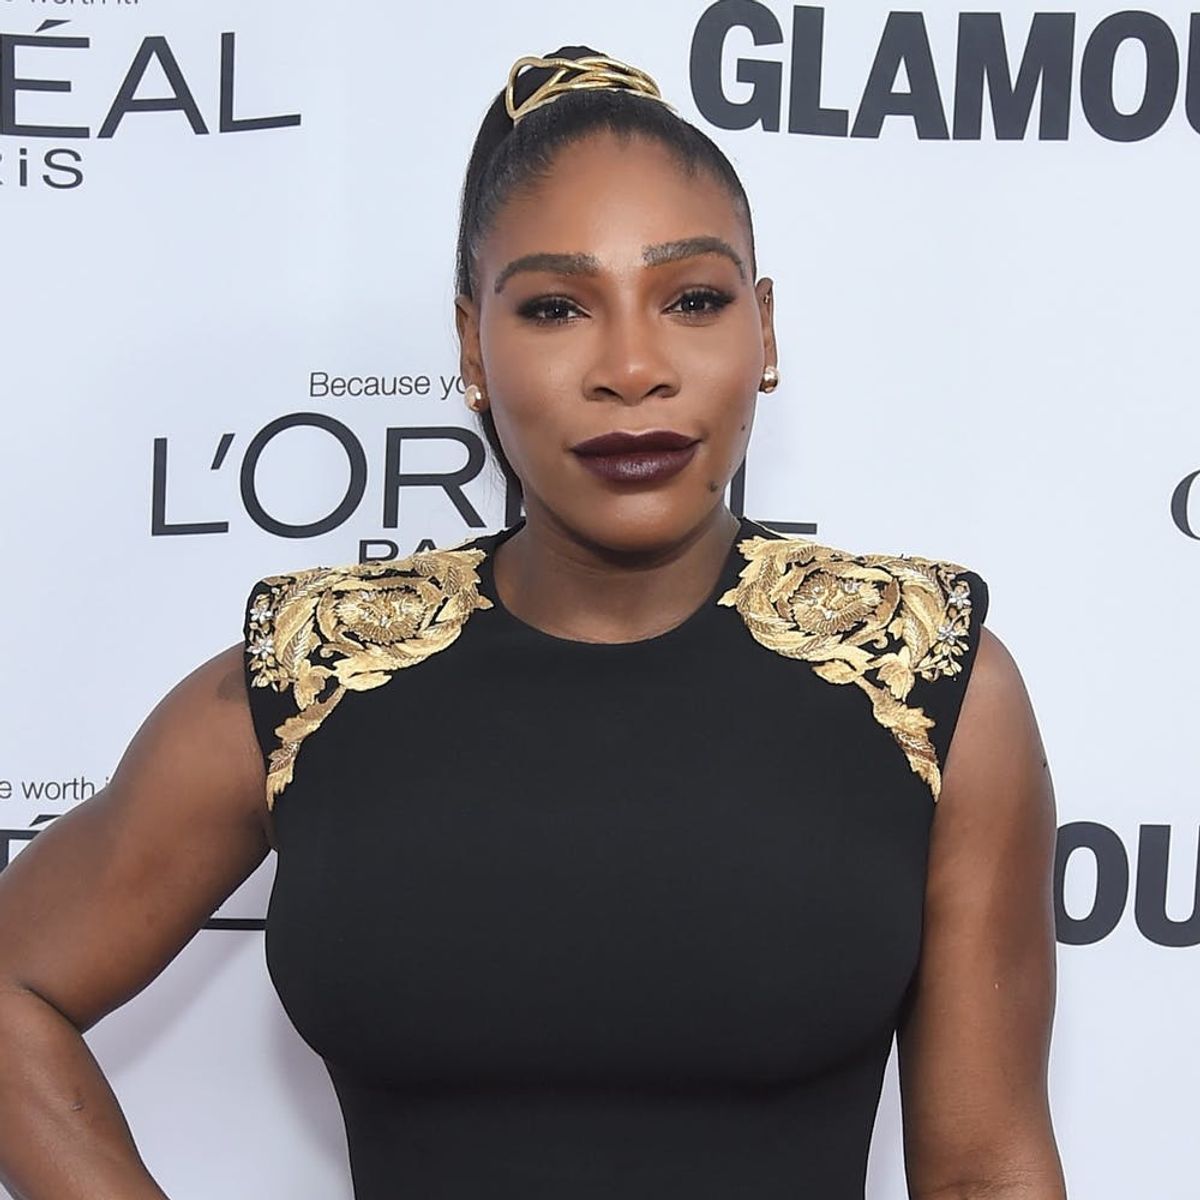 Serena Williams Is Just Like Every New Mom Asking for Teething Advice on Social Media